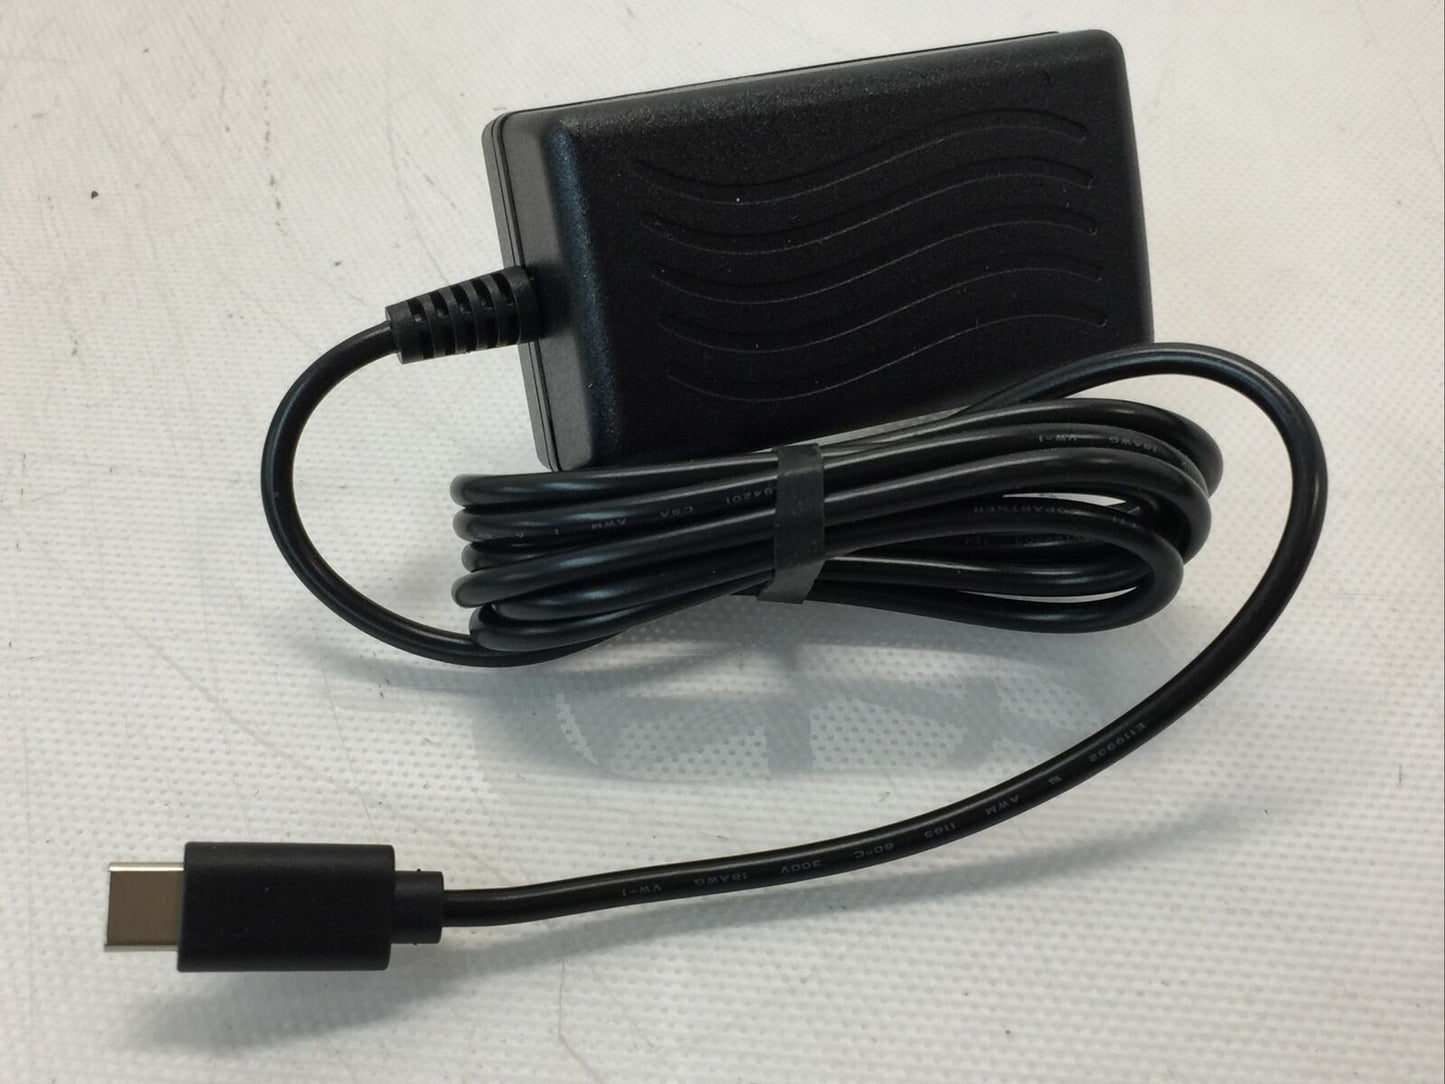 SONY USB-C Type-C AC Adapter 5 V 3.0A AC-E0530C Power Supply Charger Universal